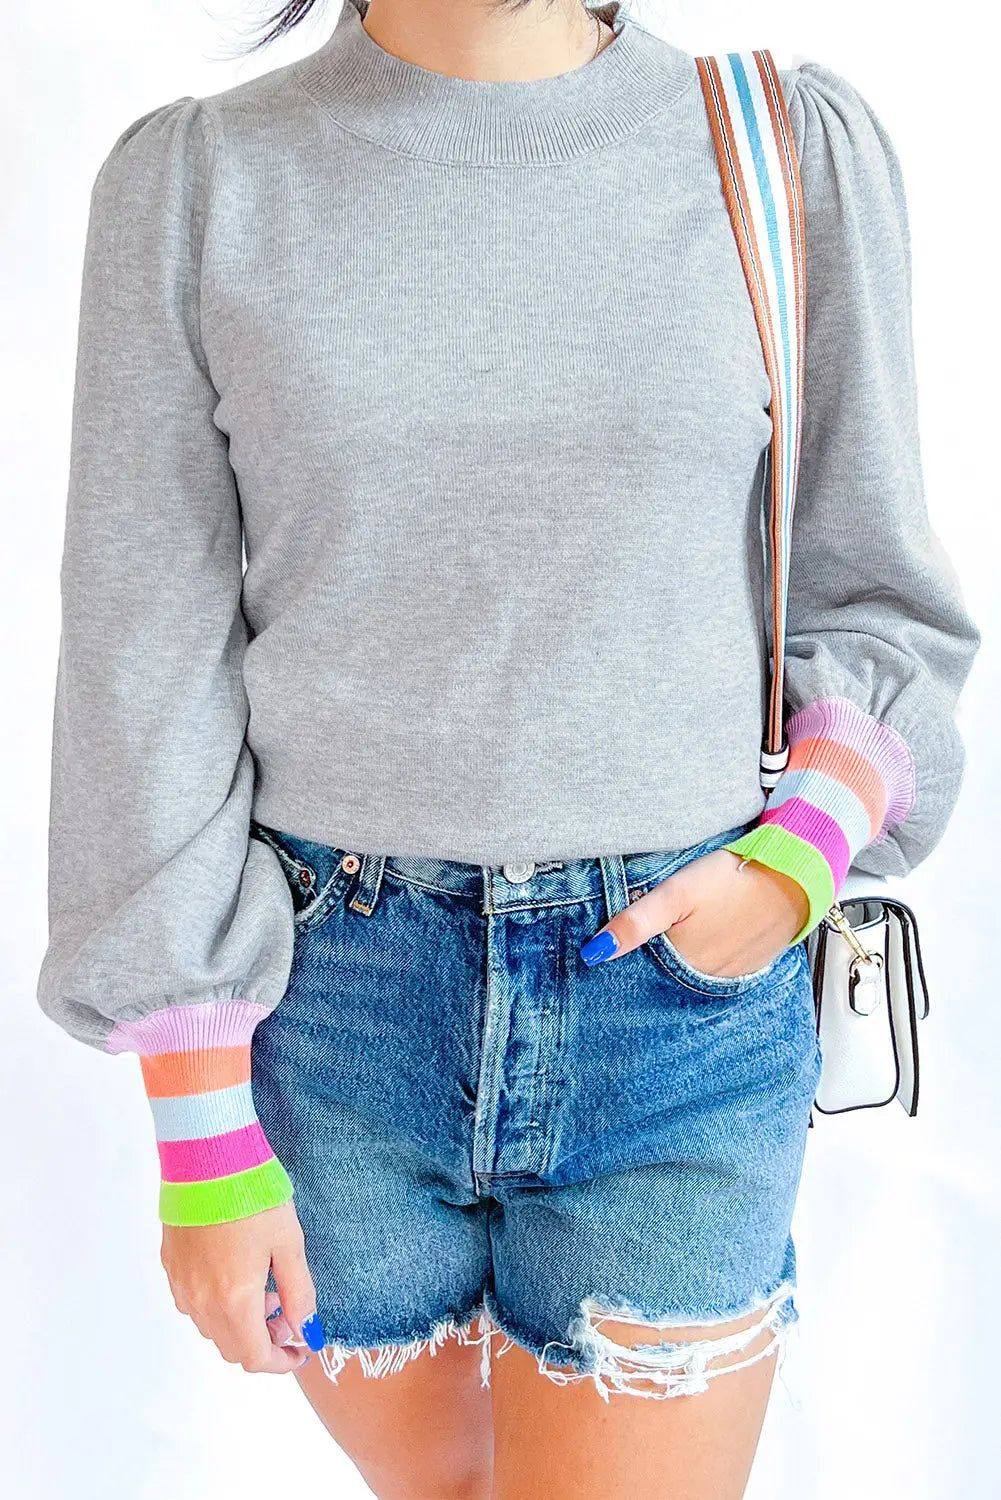 Gray crew neck colorful striped cuffs puff sleeves sweater - m / 44% polyamide + 36% viscose + 20% polyester - sweaters